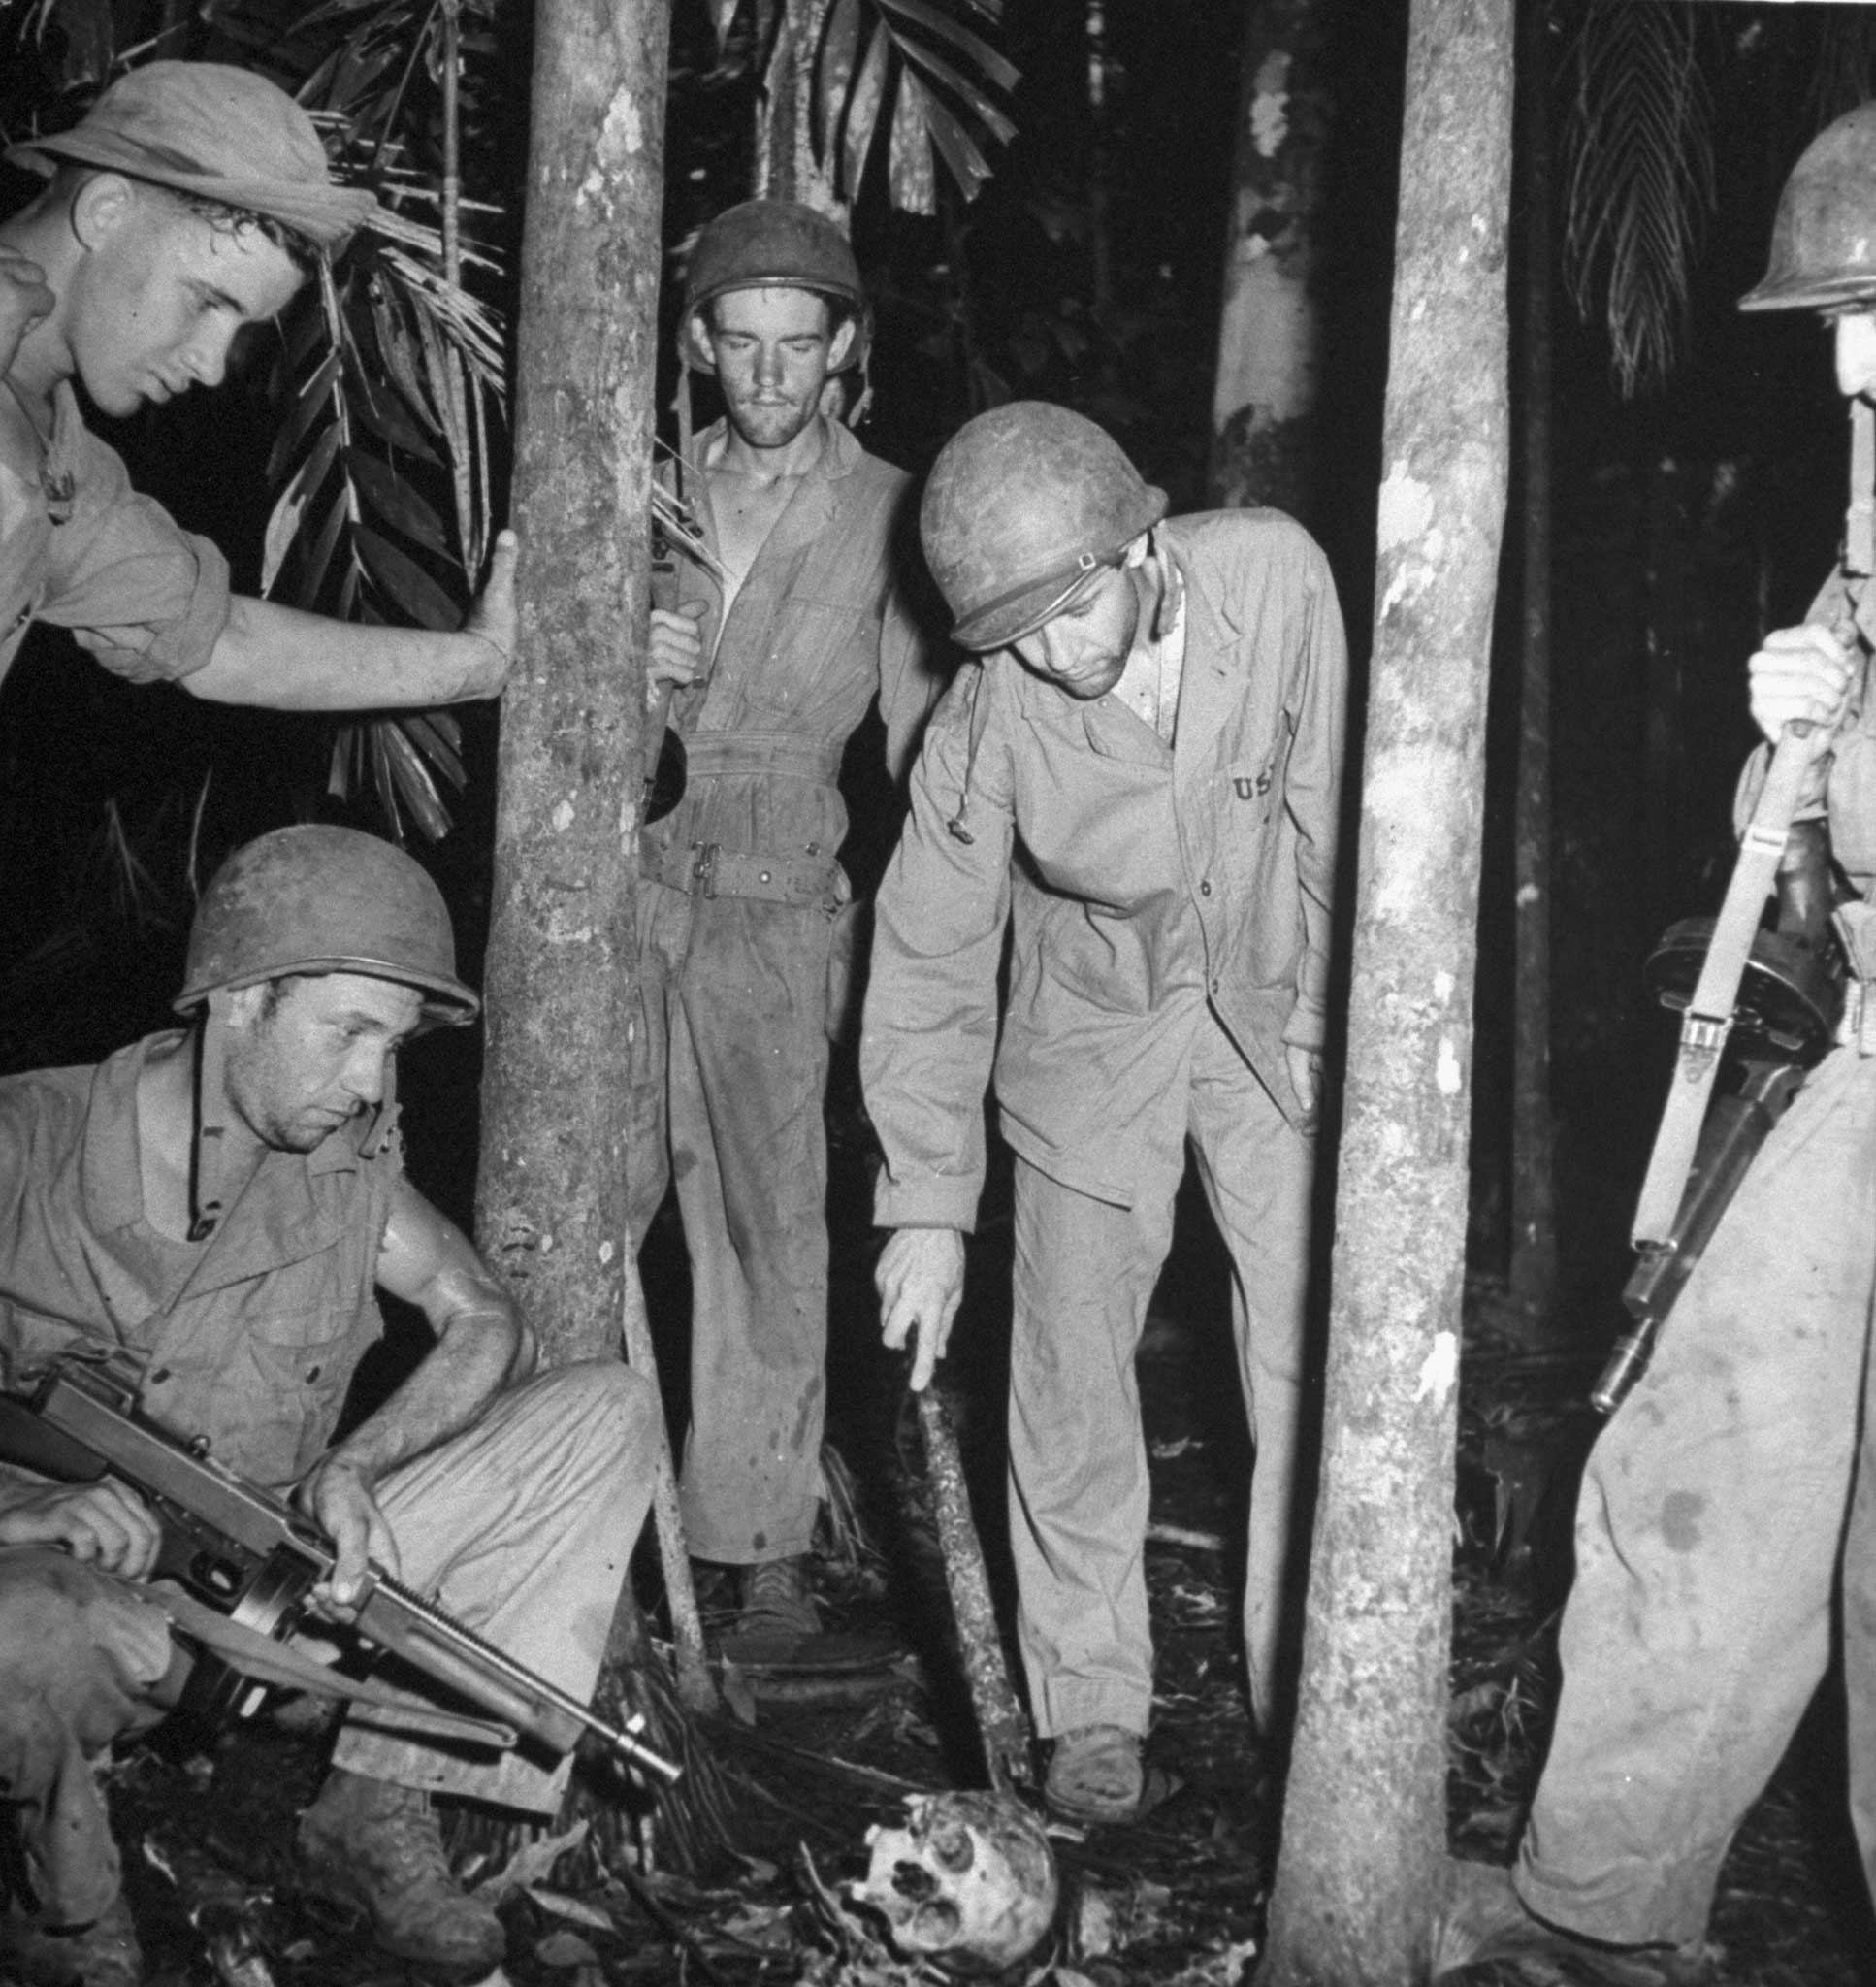 U.S. troops investigate an abandoned Japanese bivouac area, Guadalcanal, 1942.